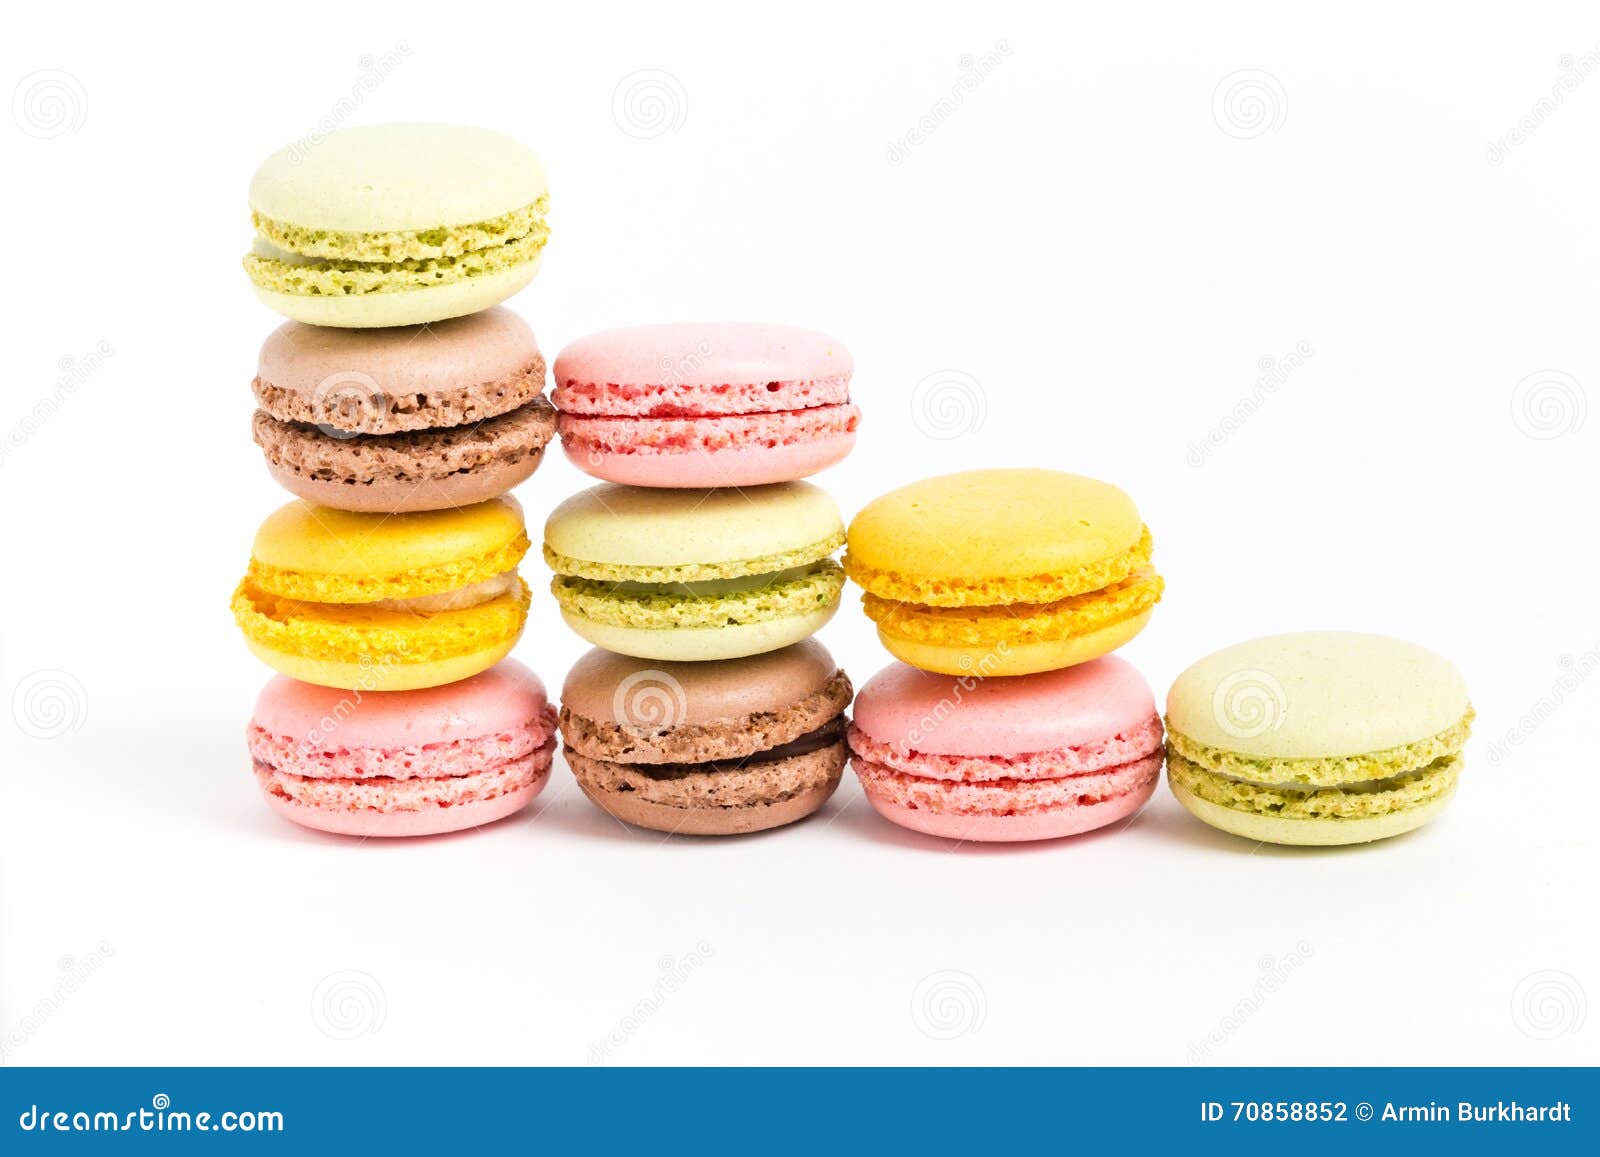 Delicious biscuits stock photo. Image of cream, confection - 70858852